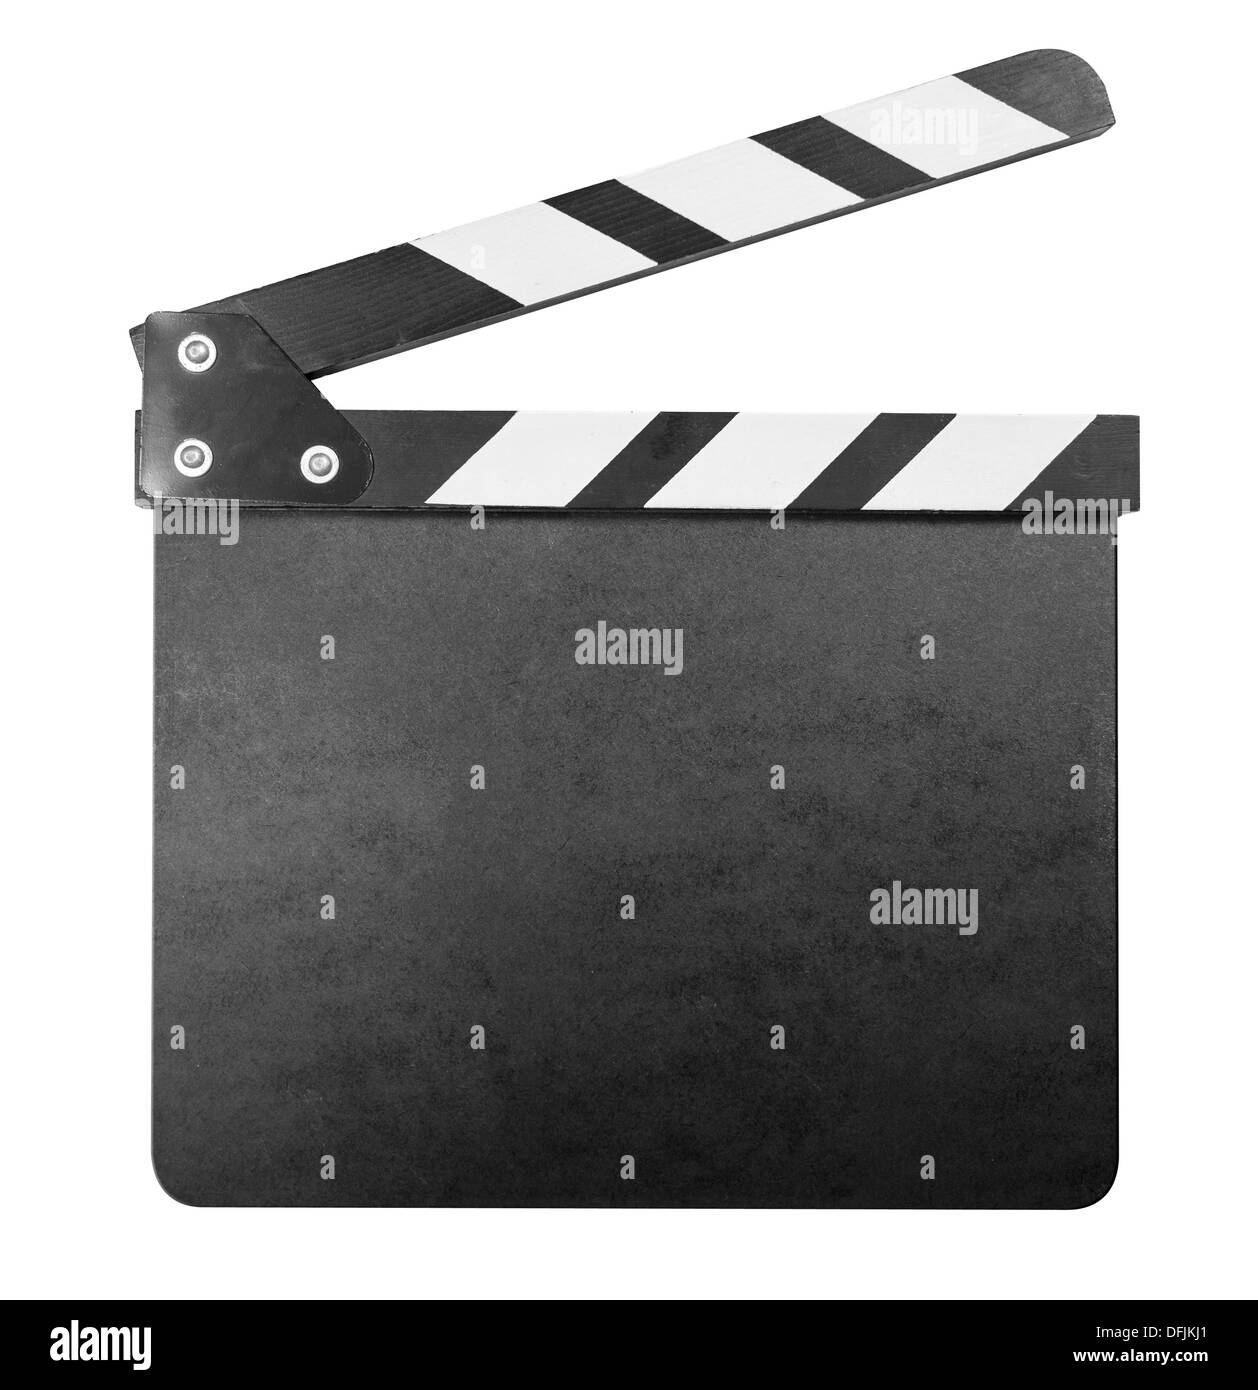 Clapper board isolated with clipping path included Stock Photo